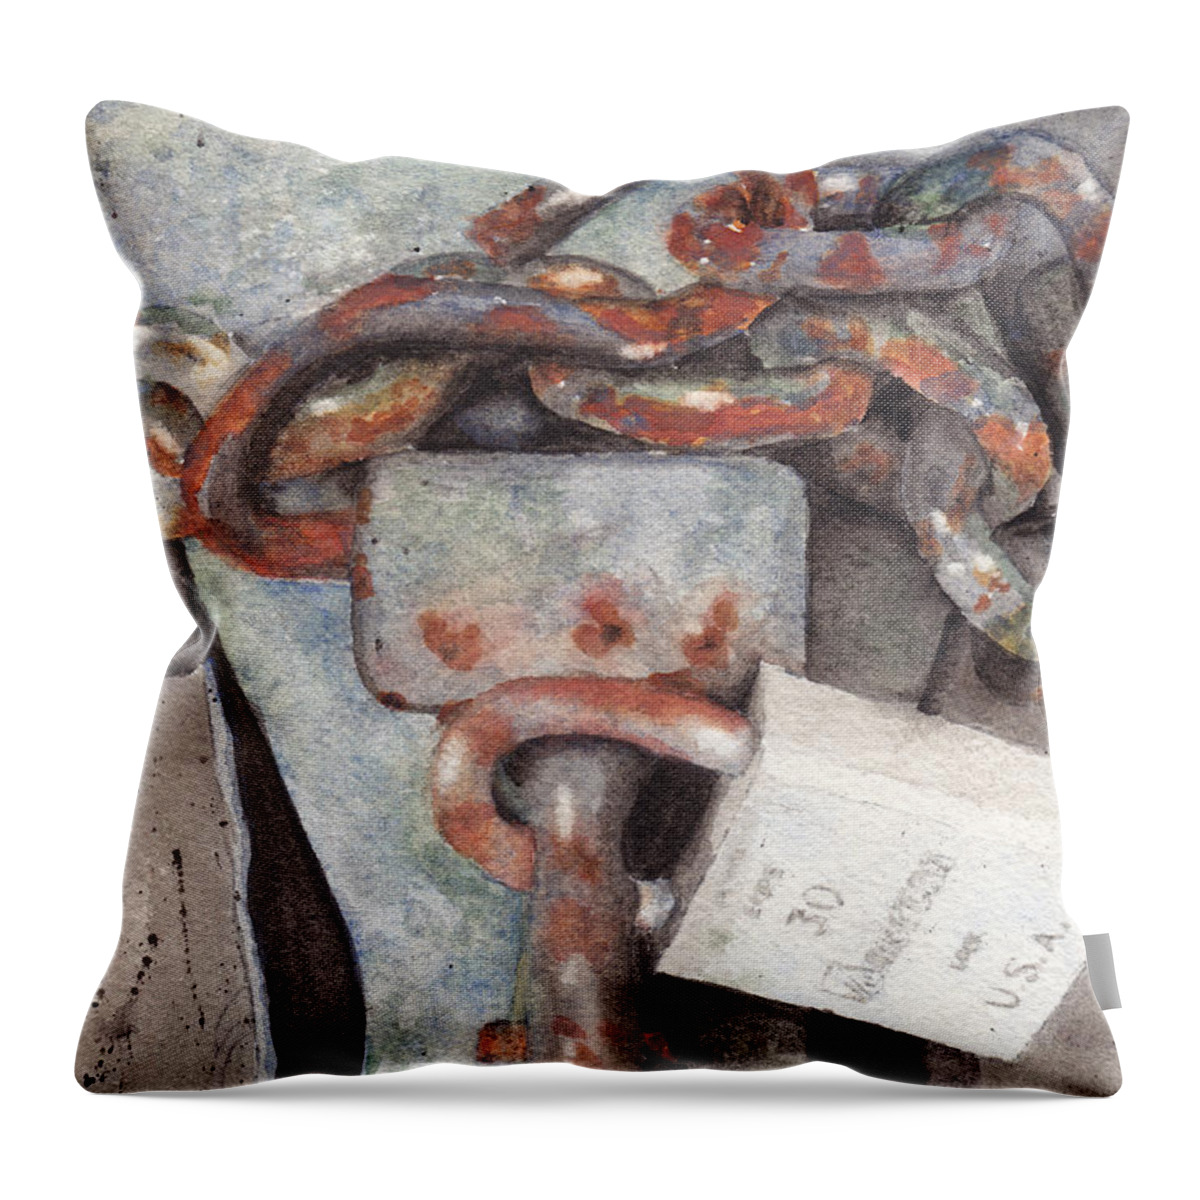 Lock Throw Pillow featuring the painting Hitch Lock by Ken Powers